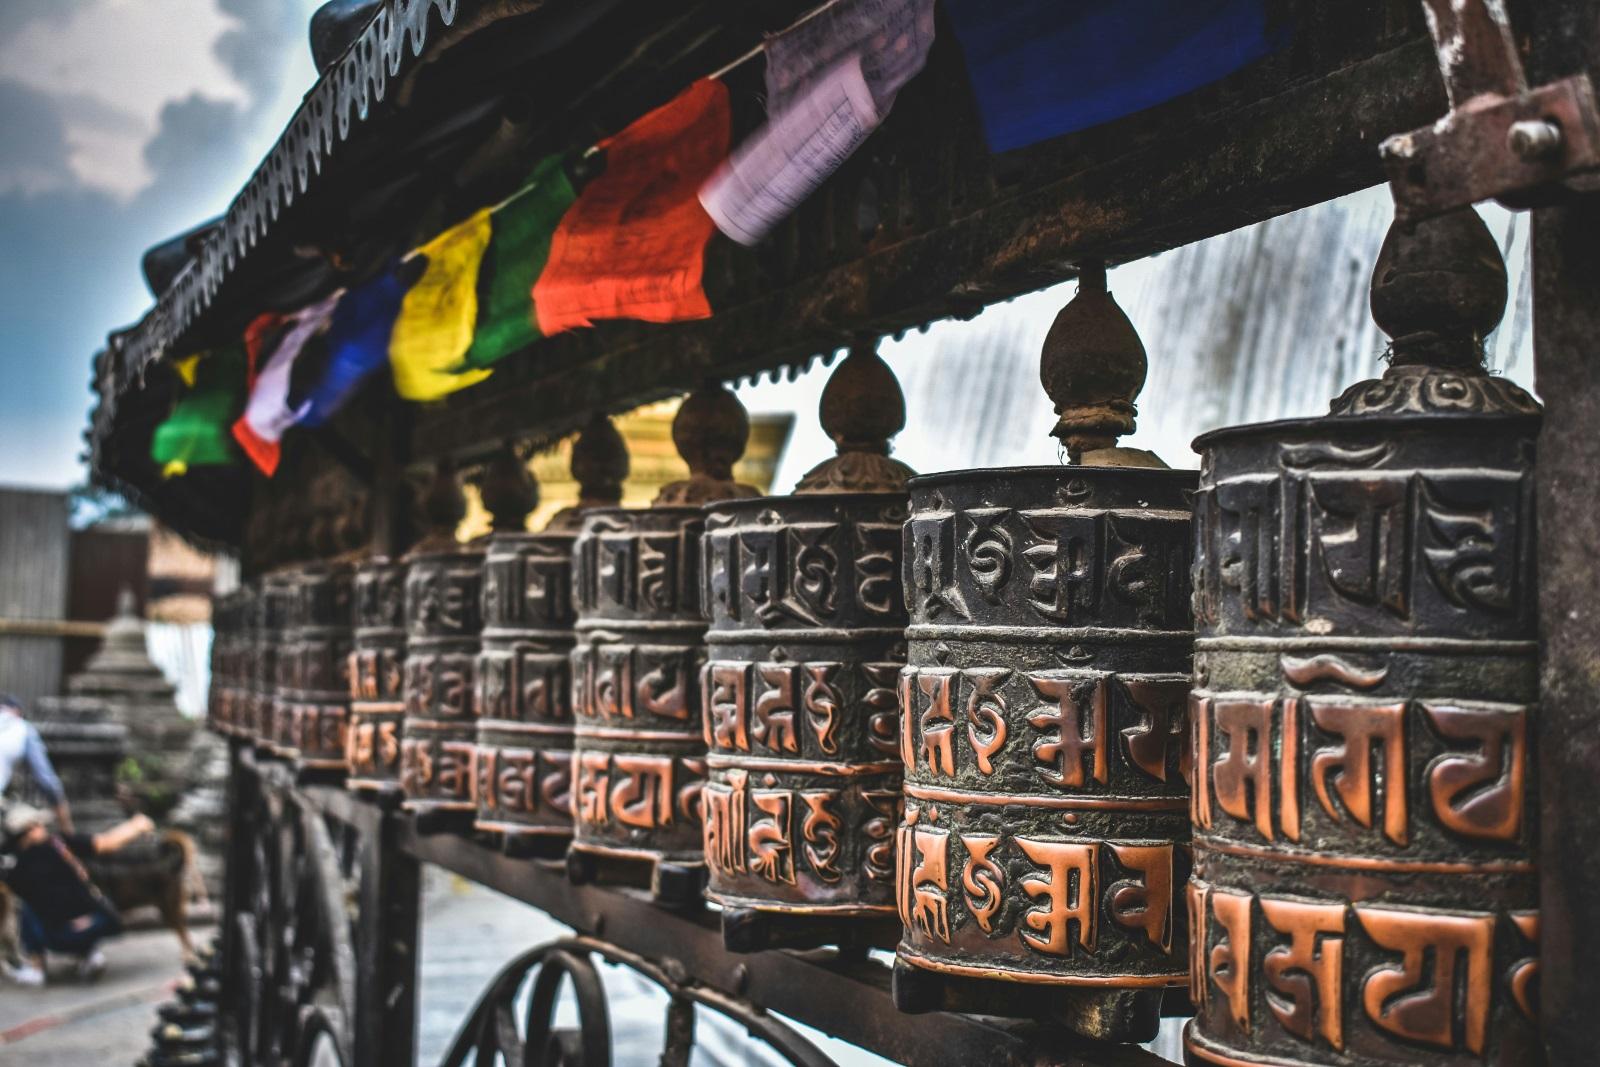 "Cultural Footsteps: An Immersive Tour of Nepal"